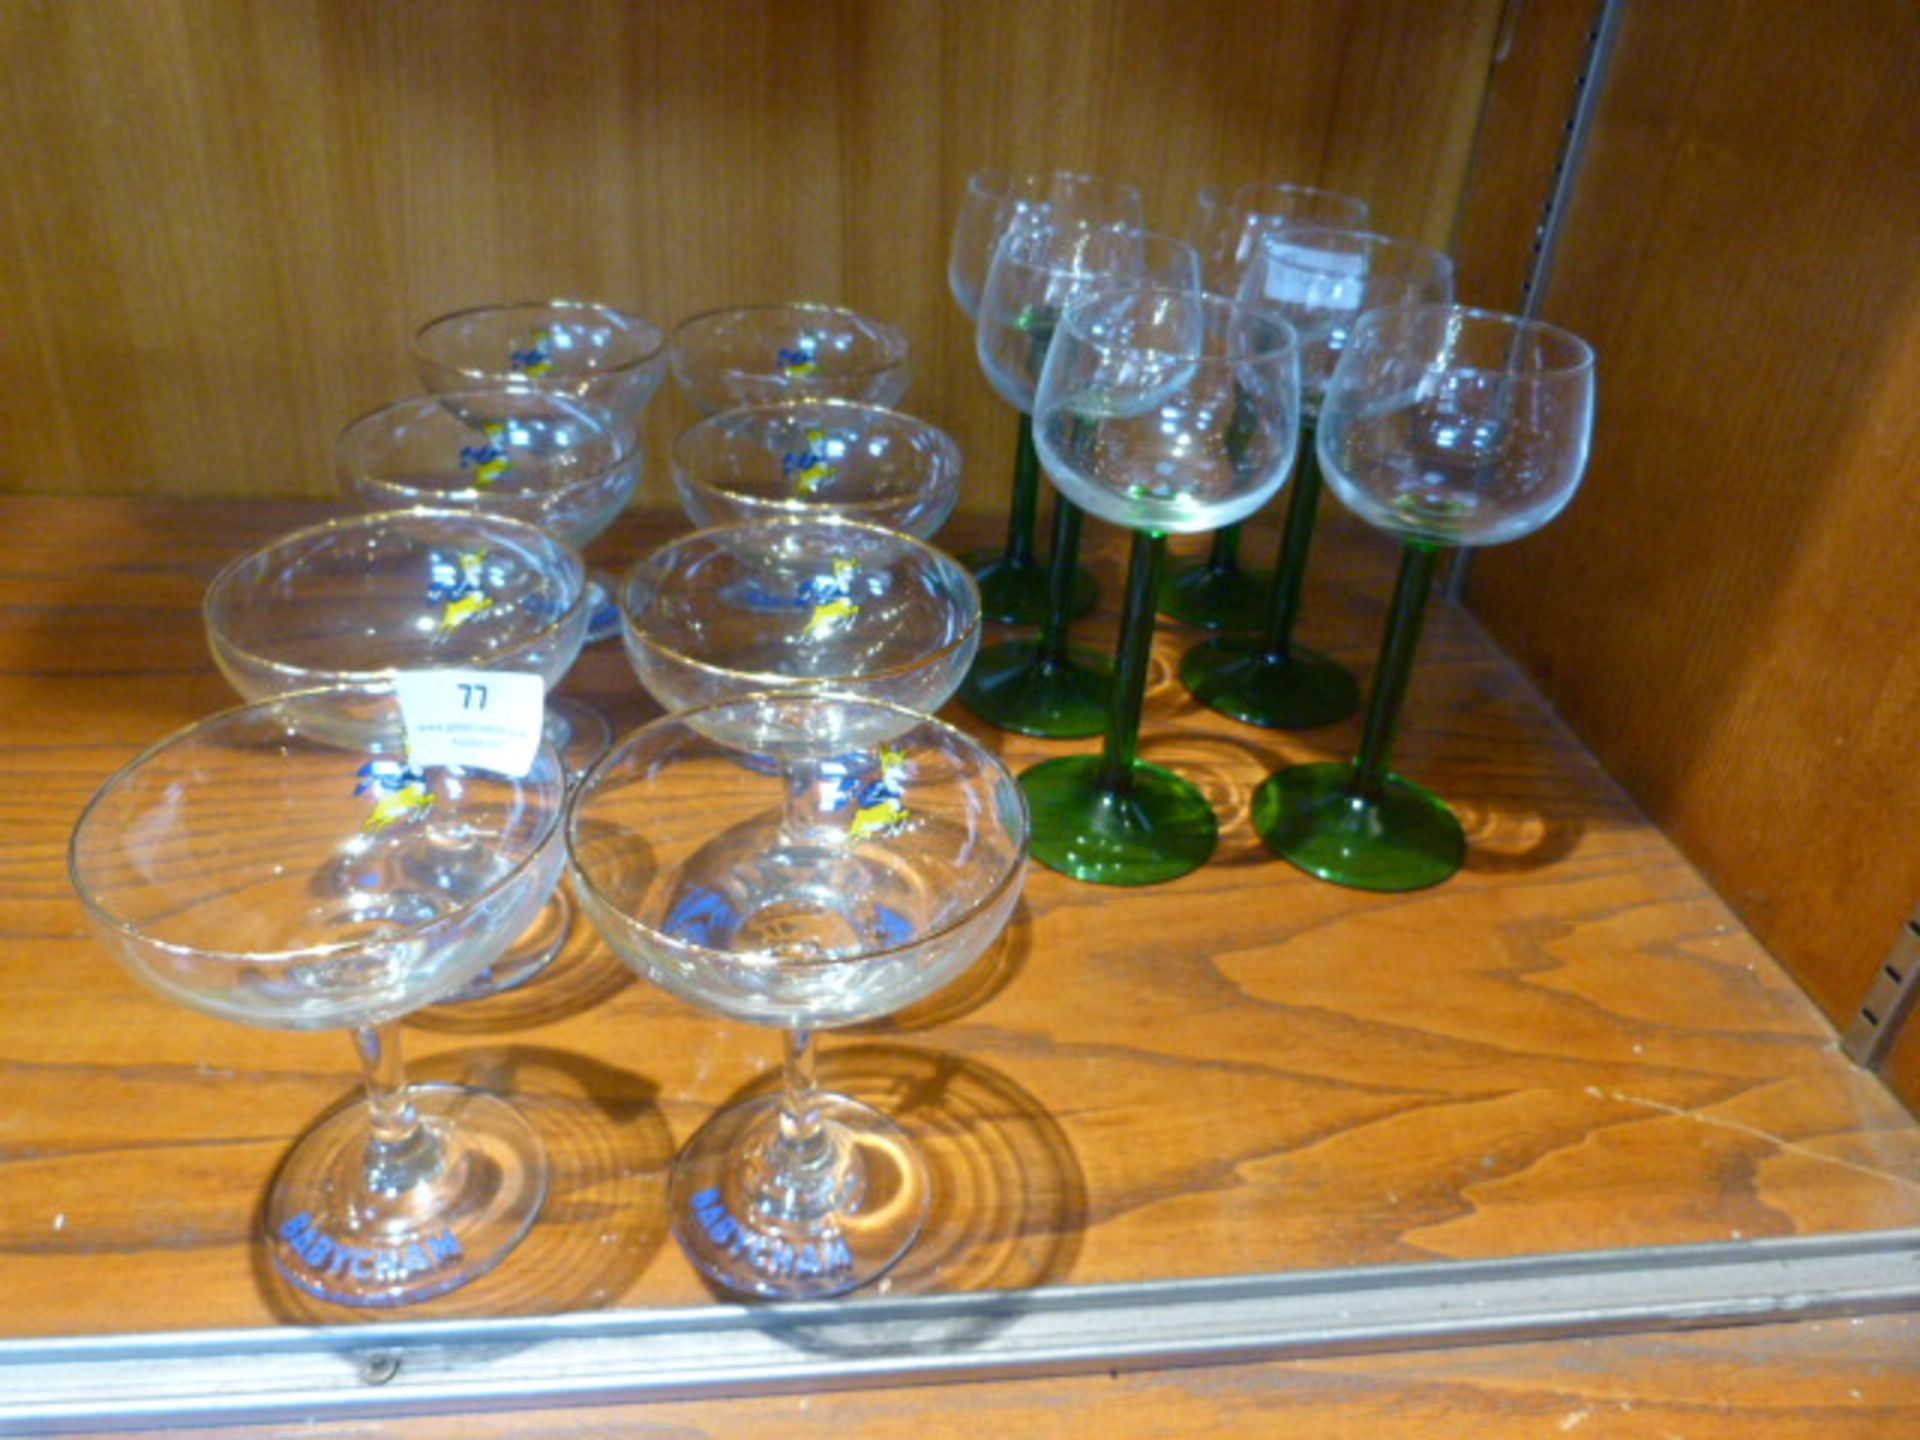 Eight Babycham Glasses and Six Green Glasses